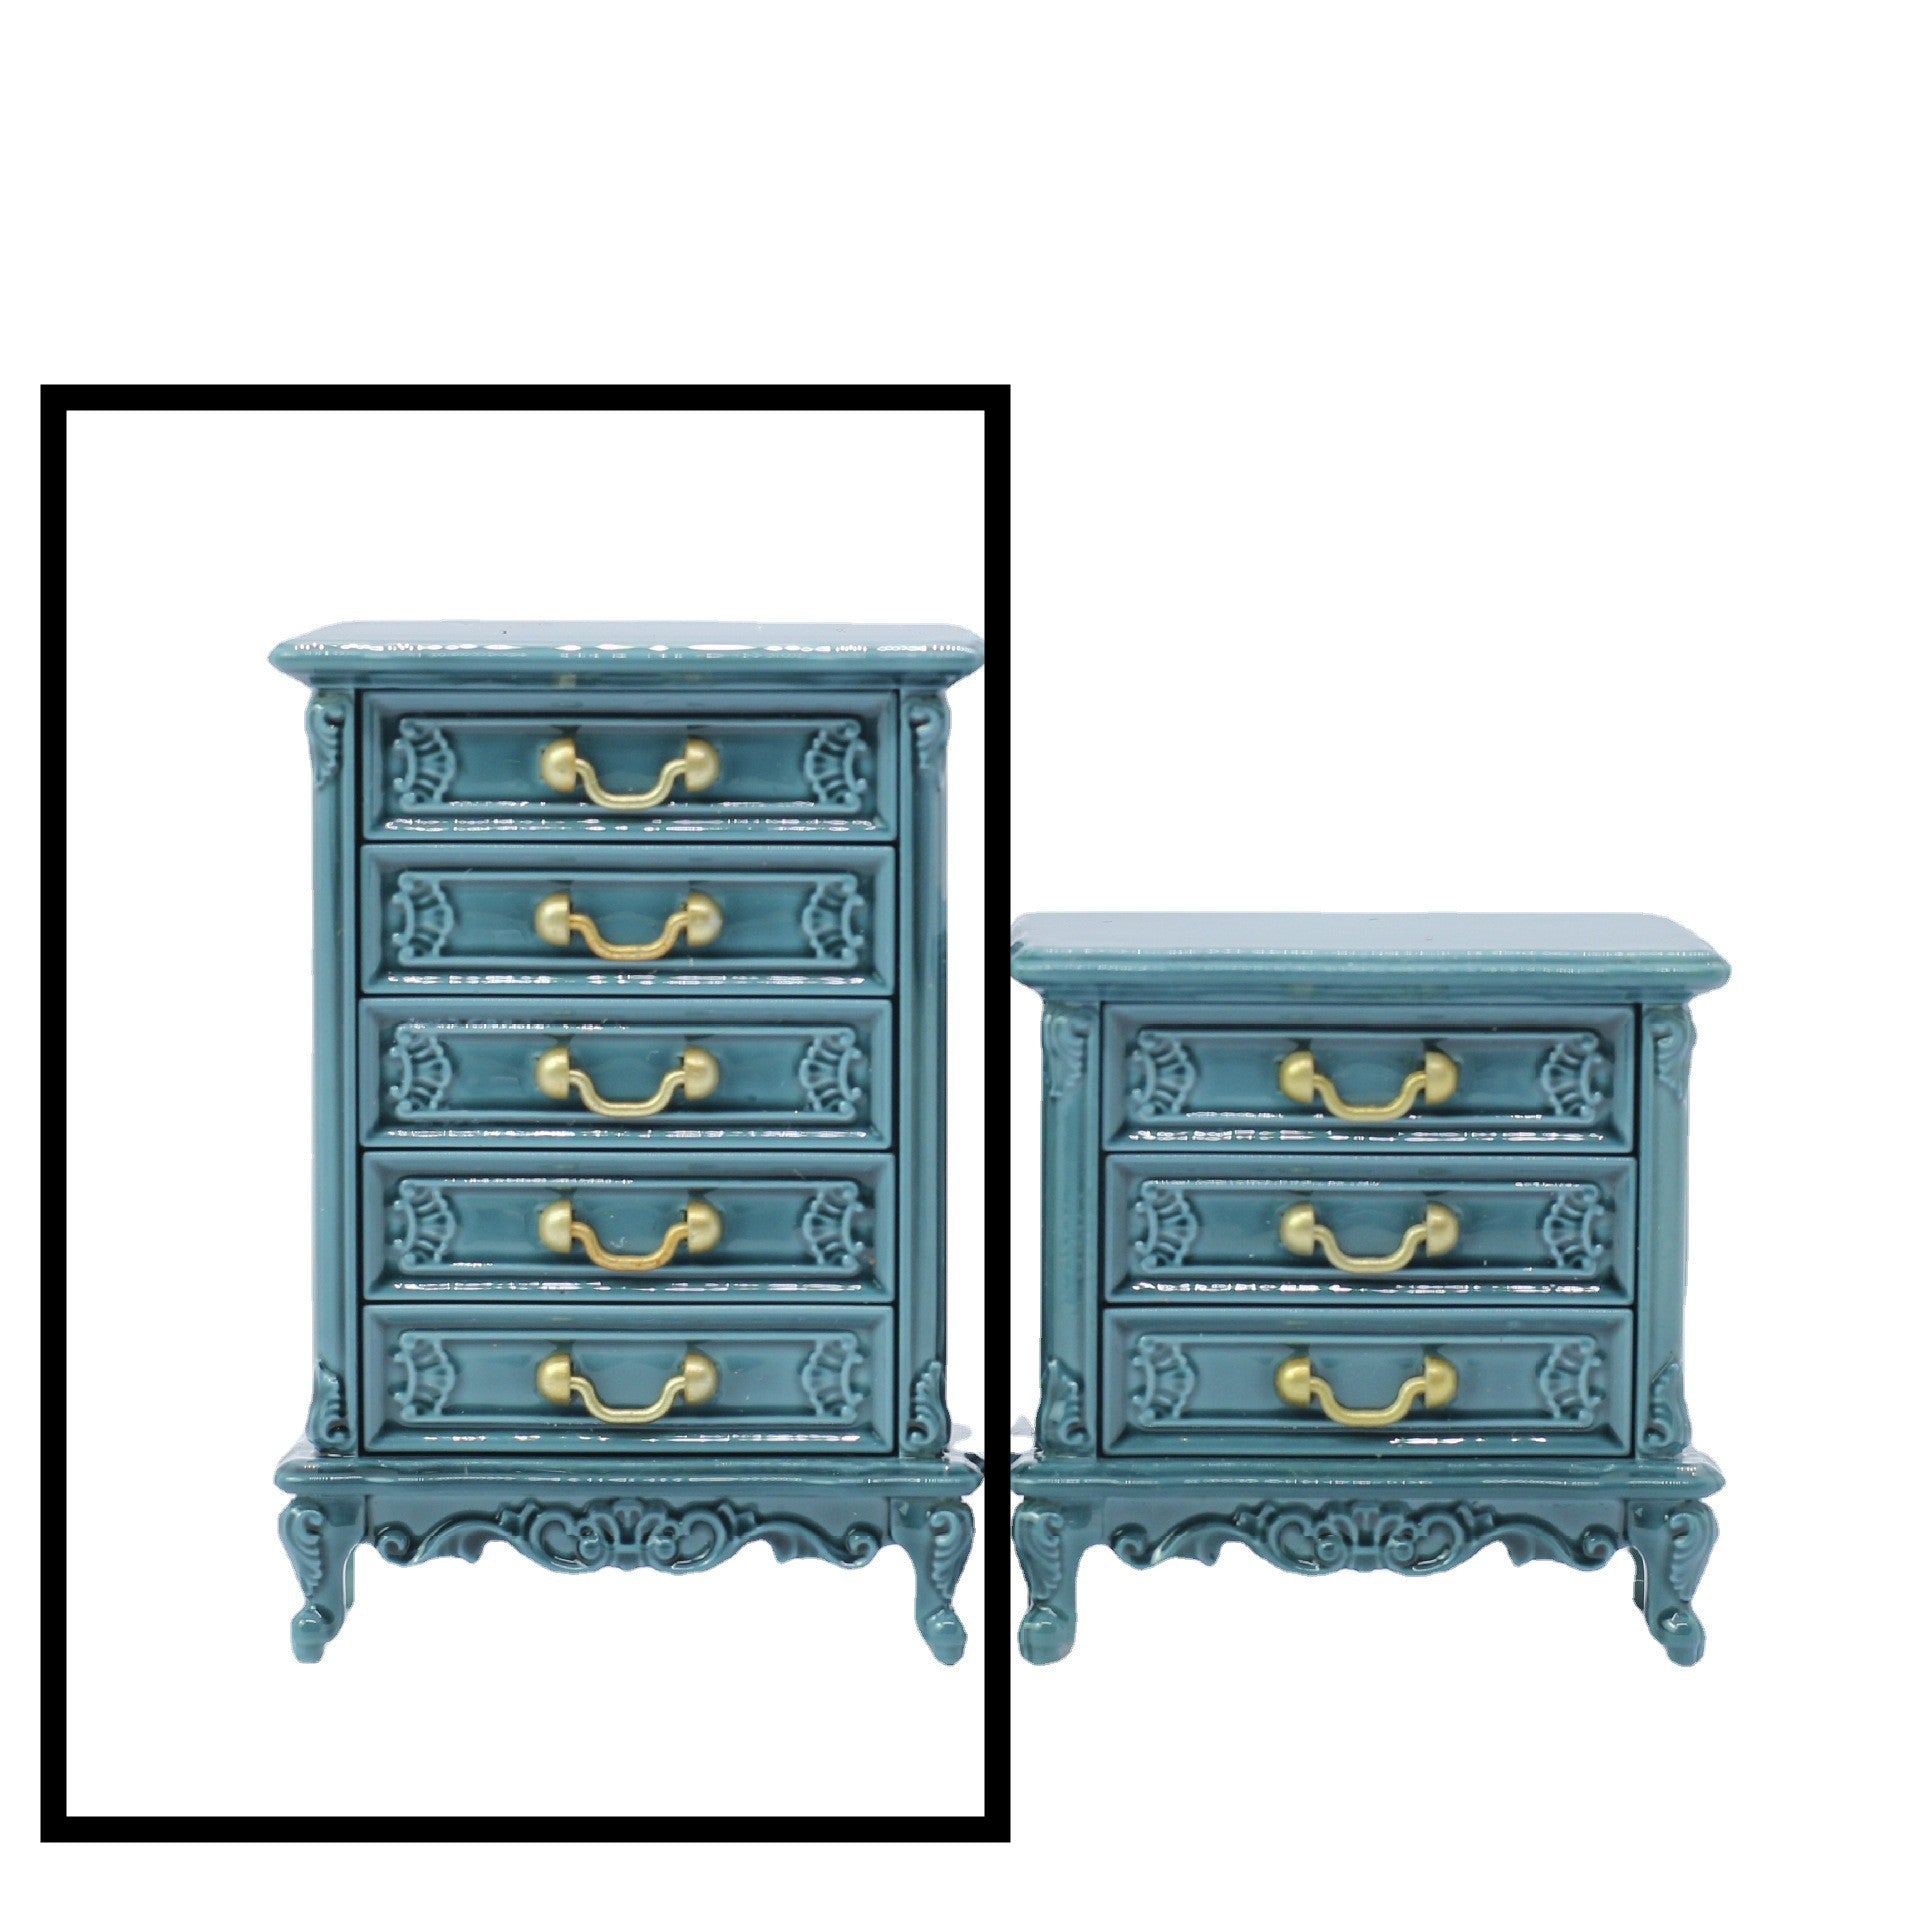 Chest of Drawers with opening Drawers size comparison